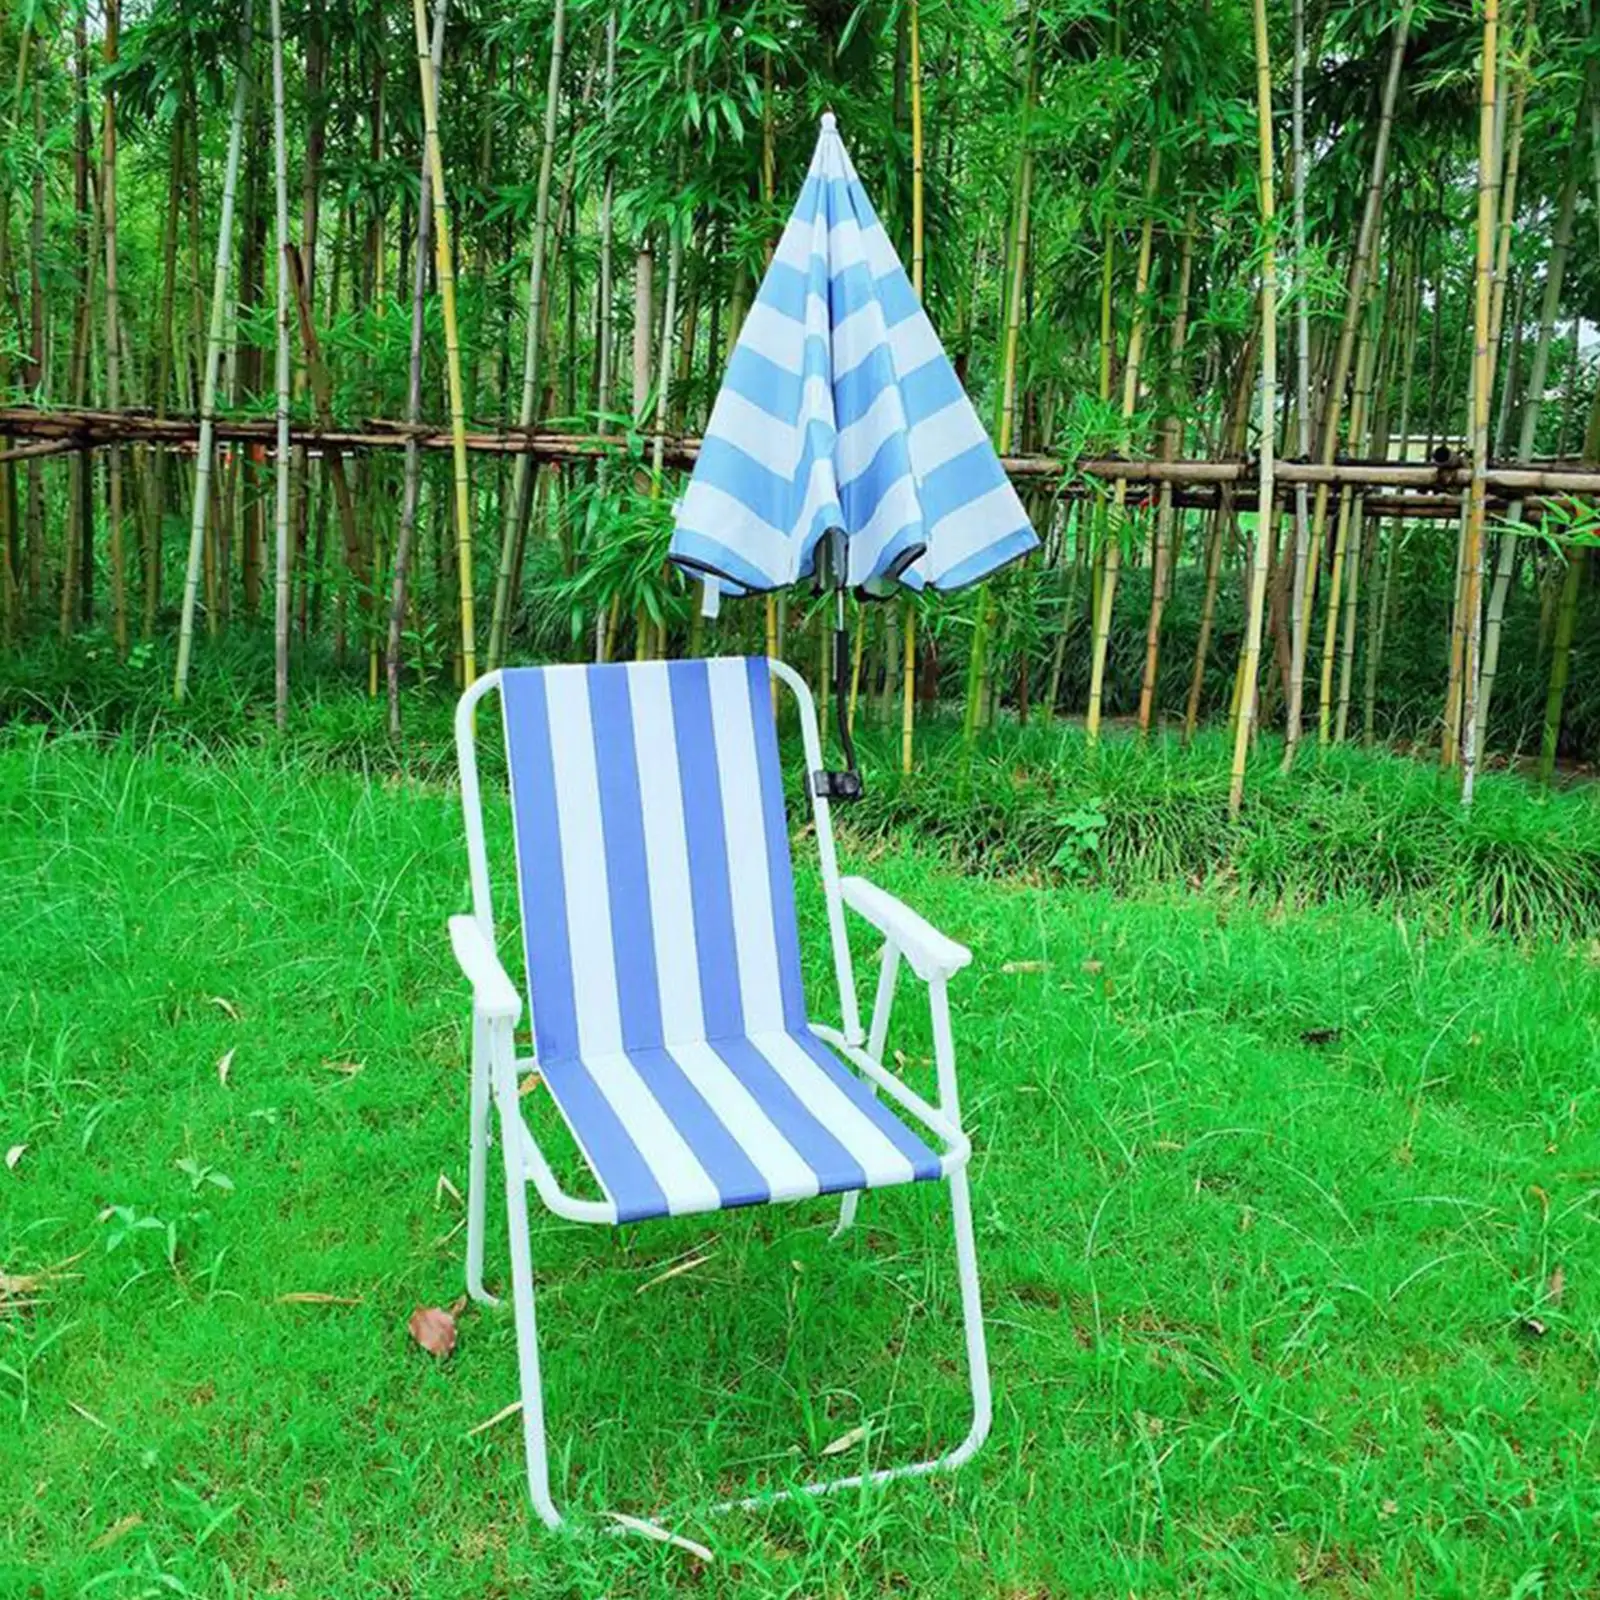 Foldable Beach Umbrella Sunshade Shelter for Chair Camping Fishing